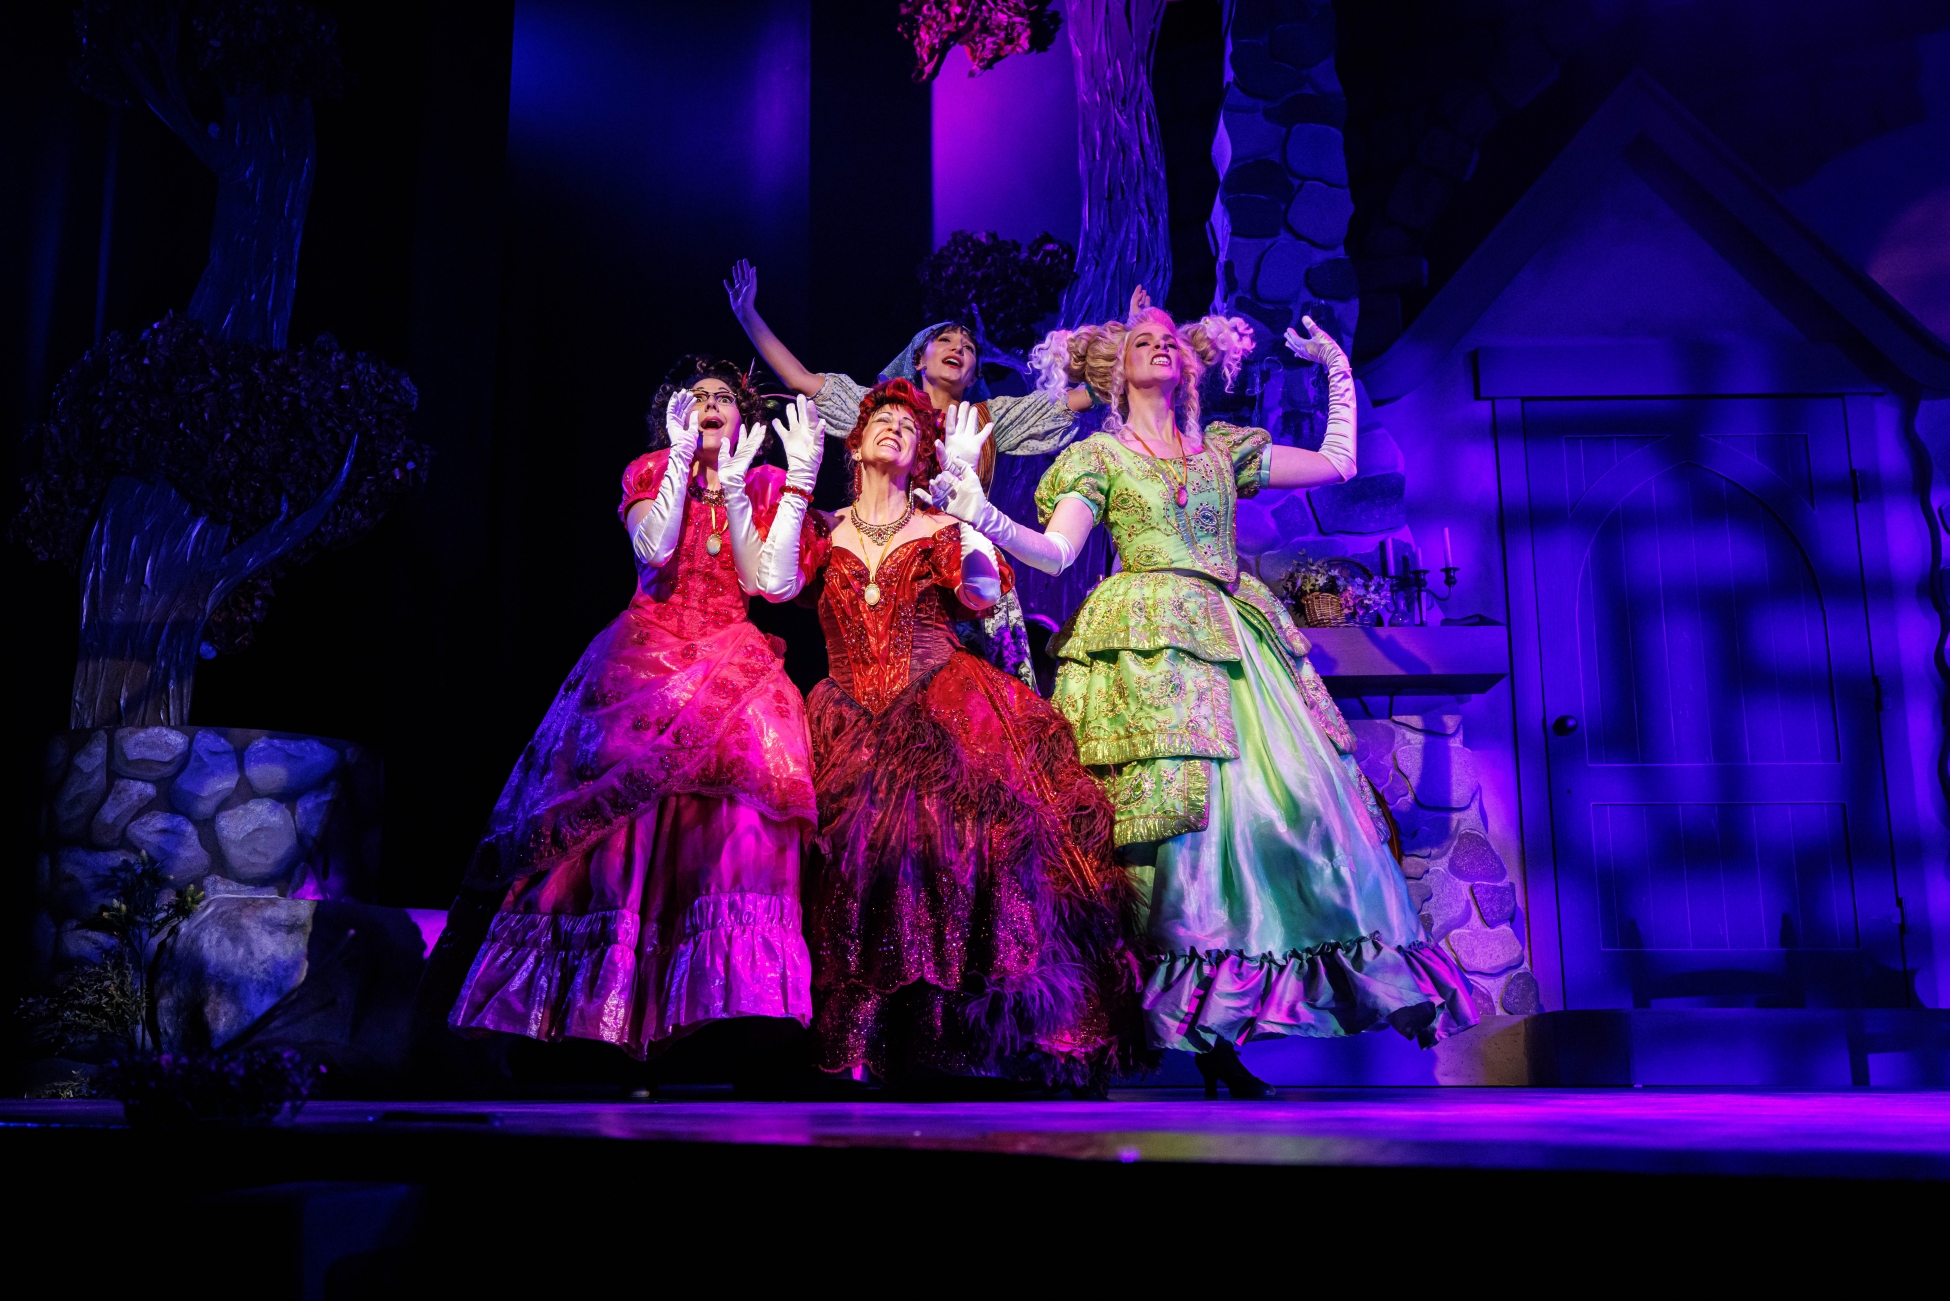 Cinderella, her stepmother, and her stepsisters dance, lost in thoughts of love.